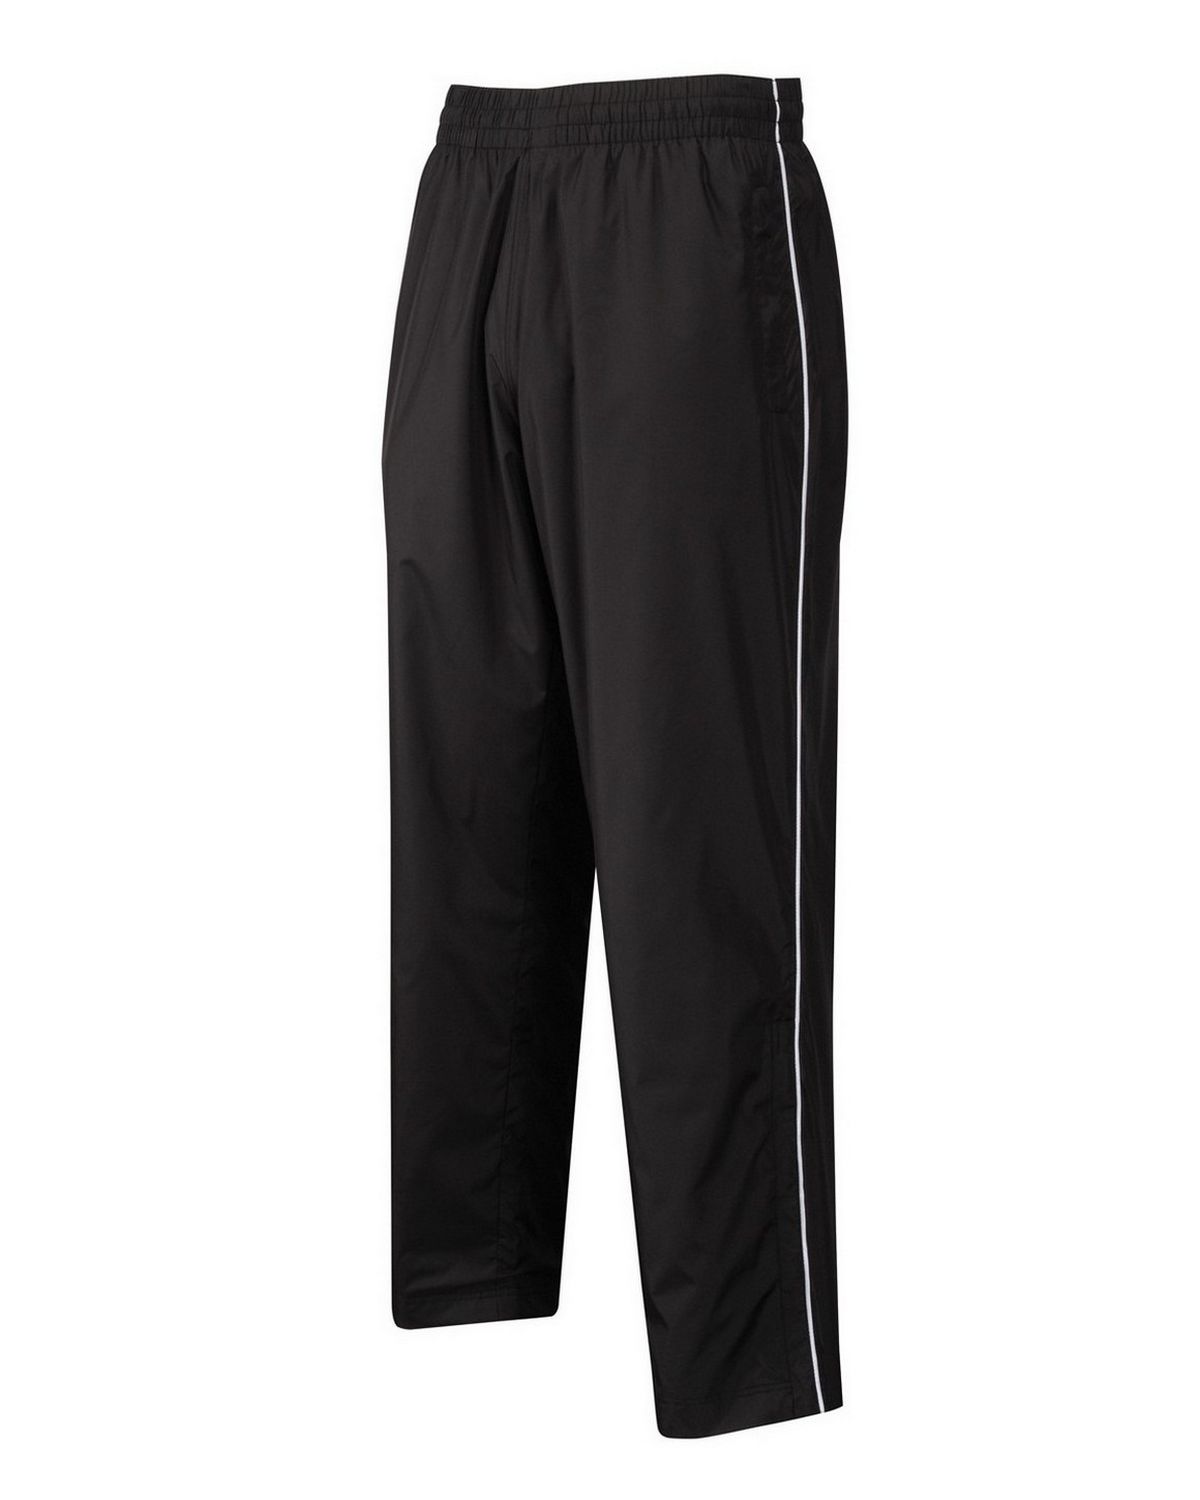 Tri-Mountain 2347 Men's micro wind pants with mesh lining ...